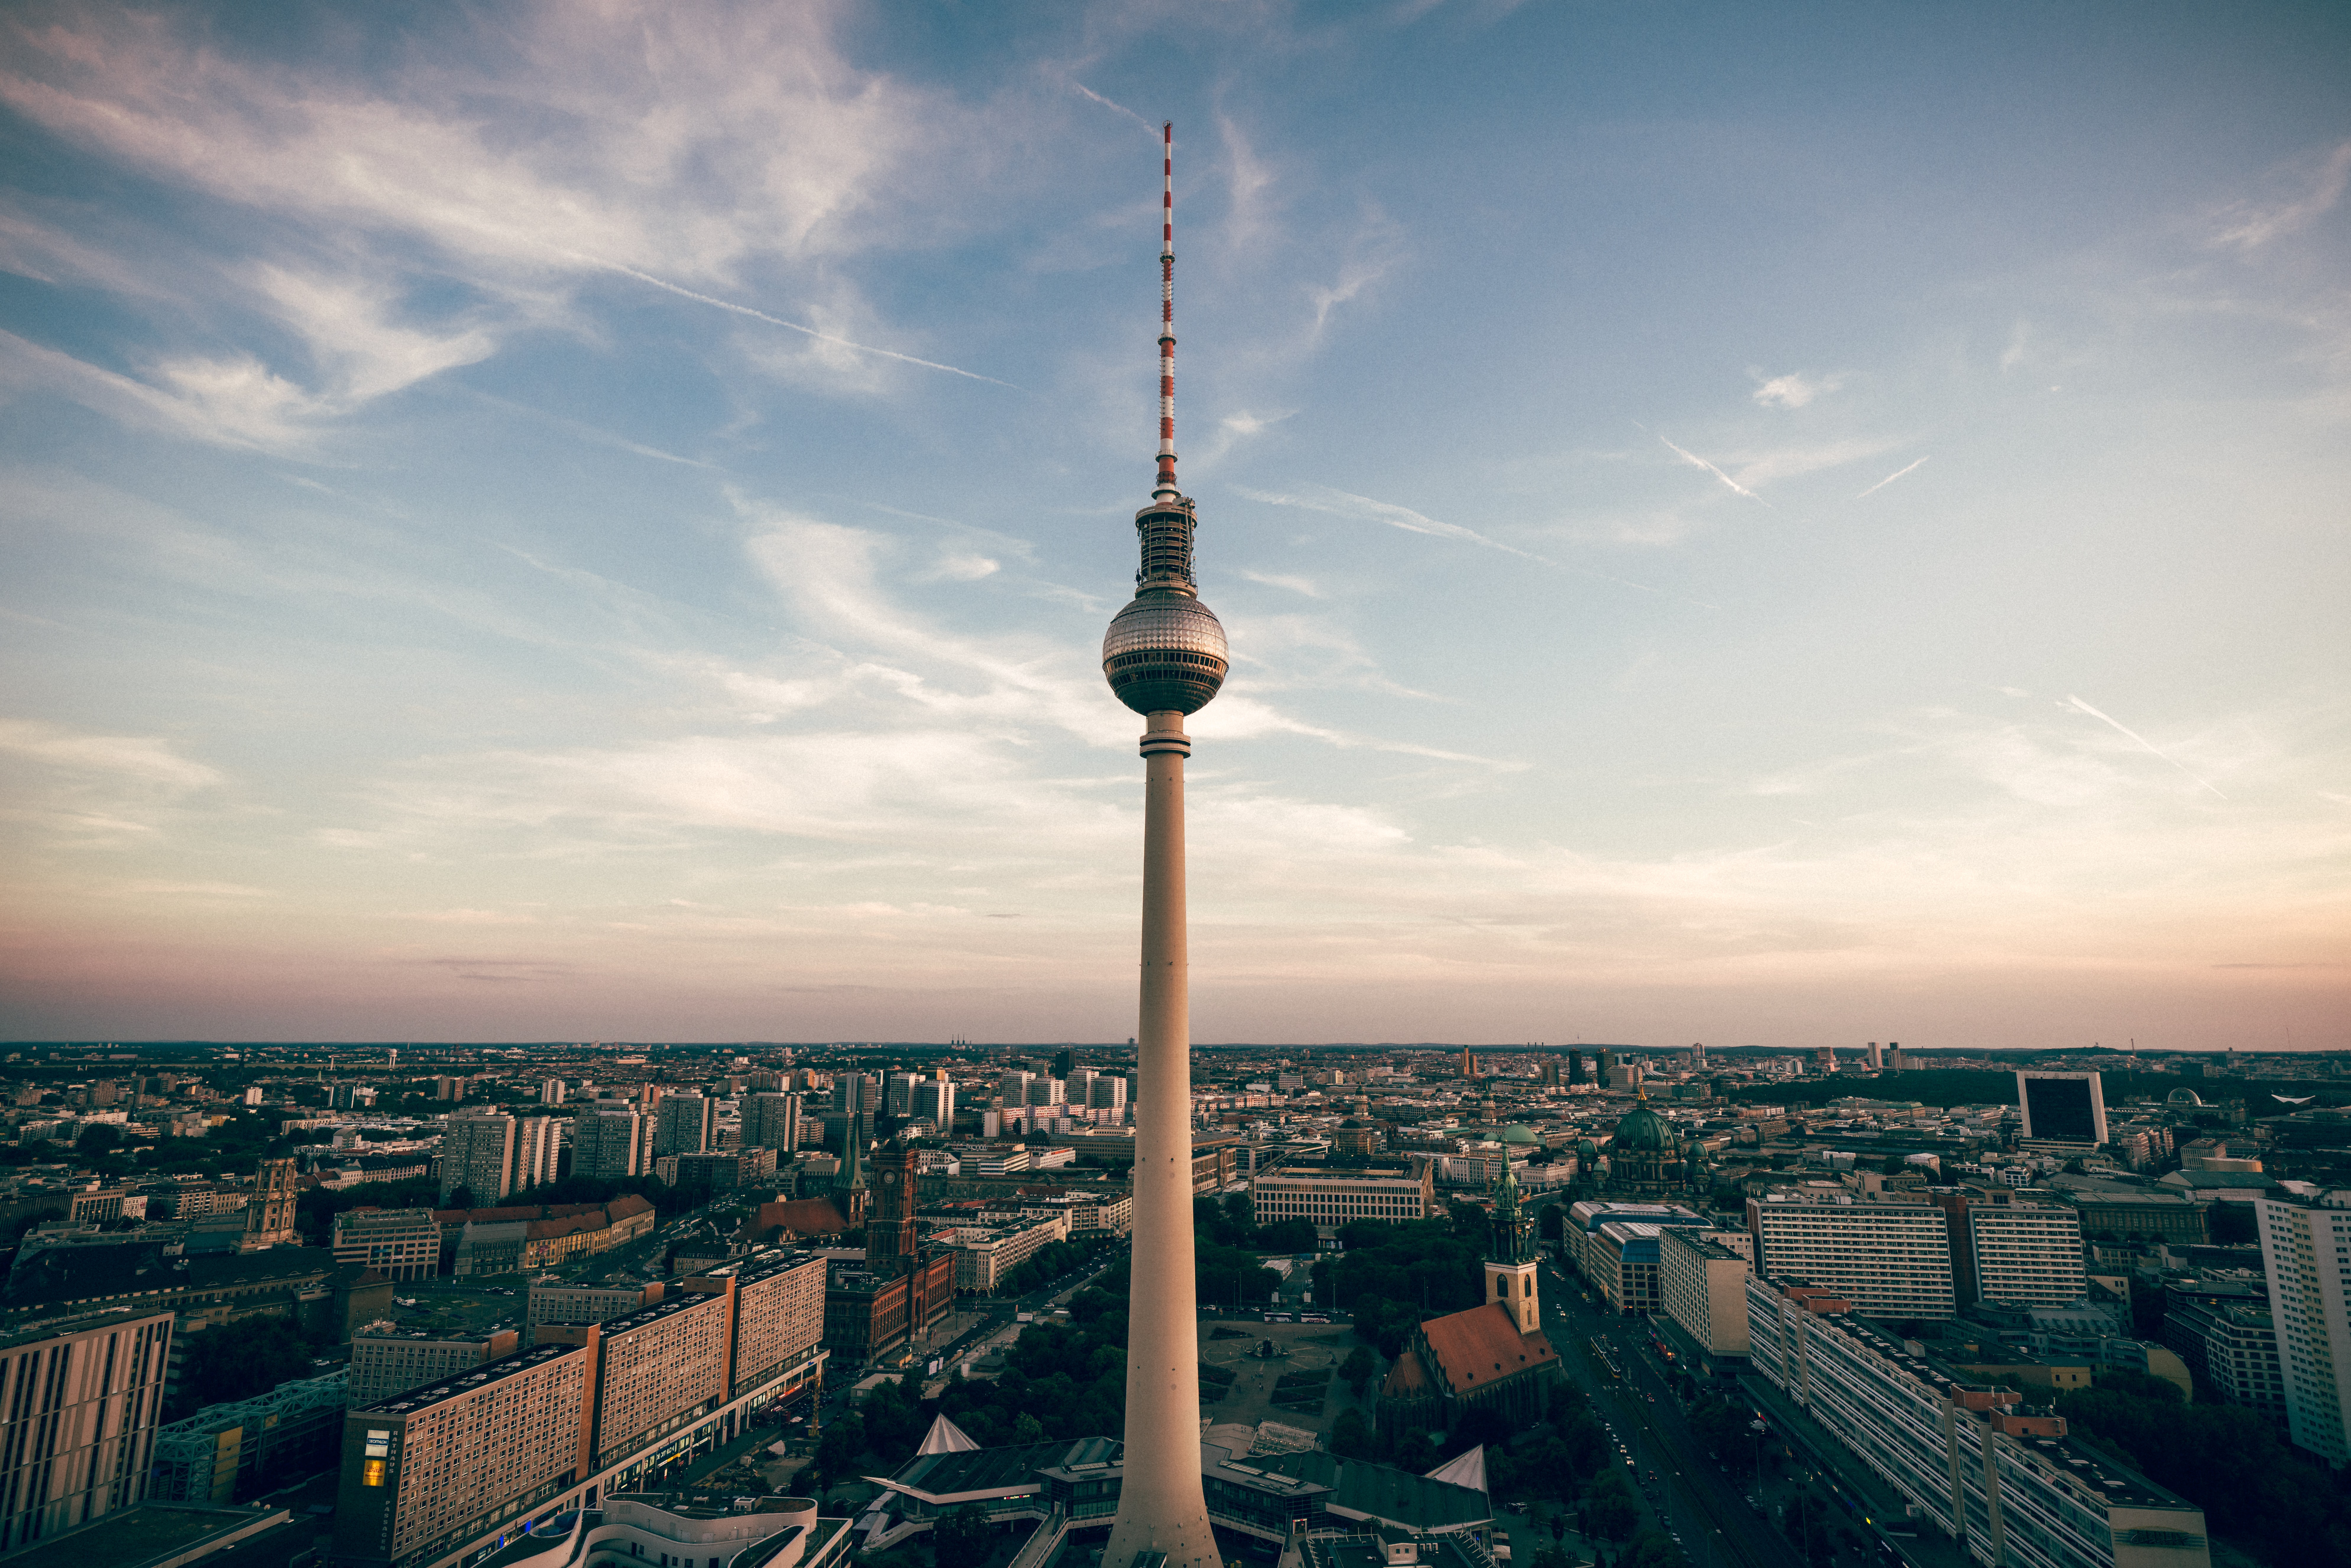 Berlin City skyline with large tower in the background